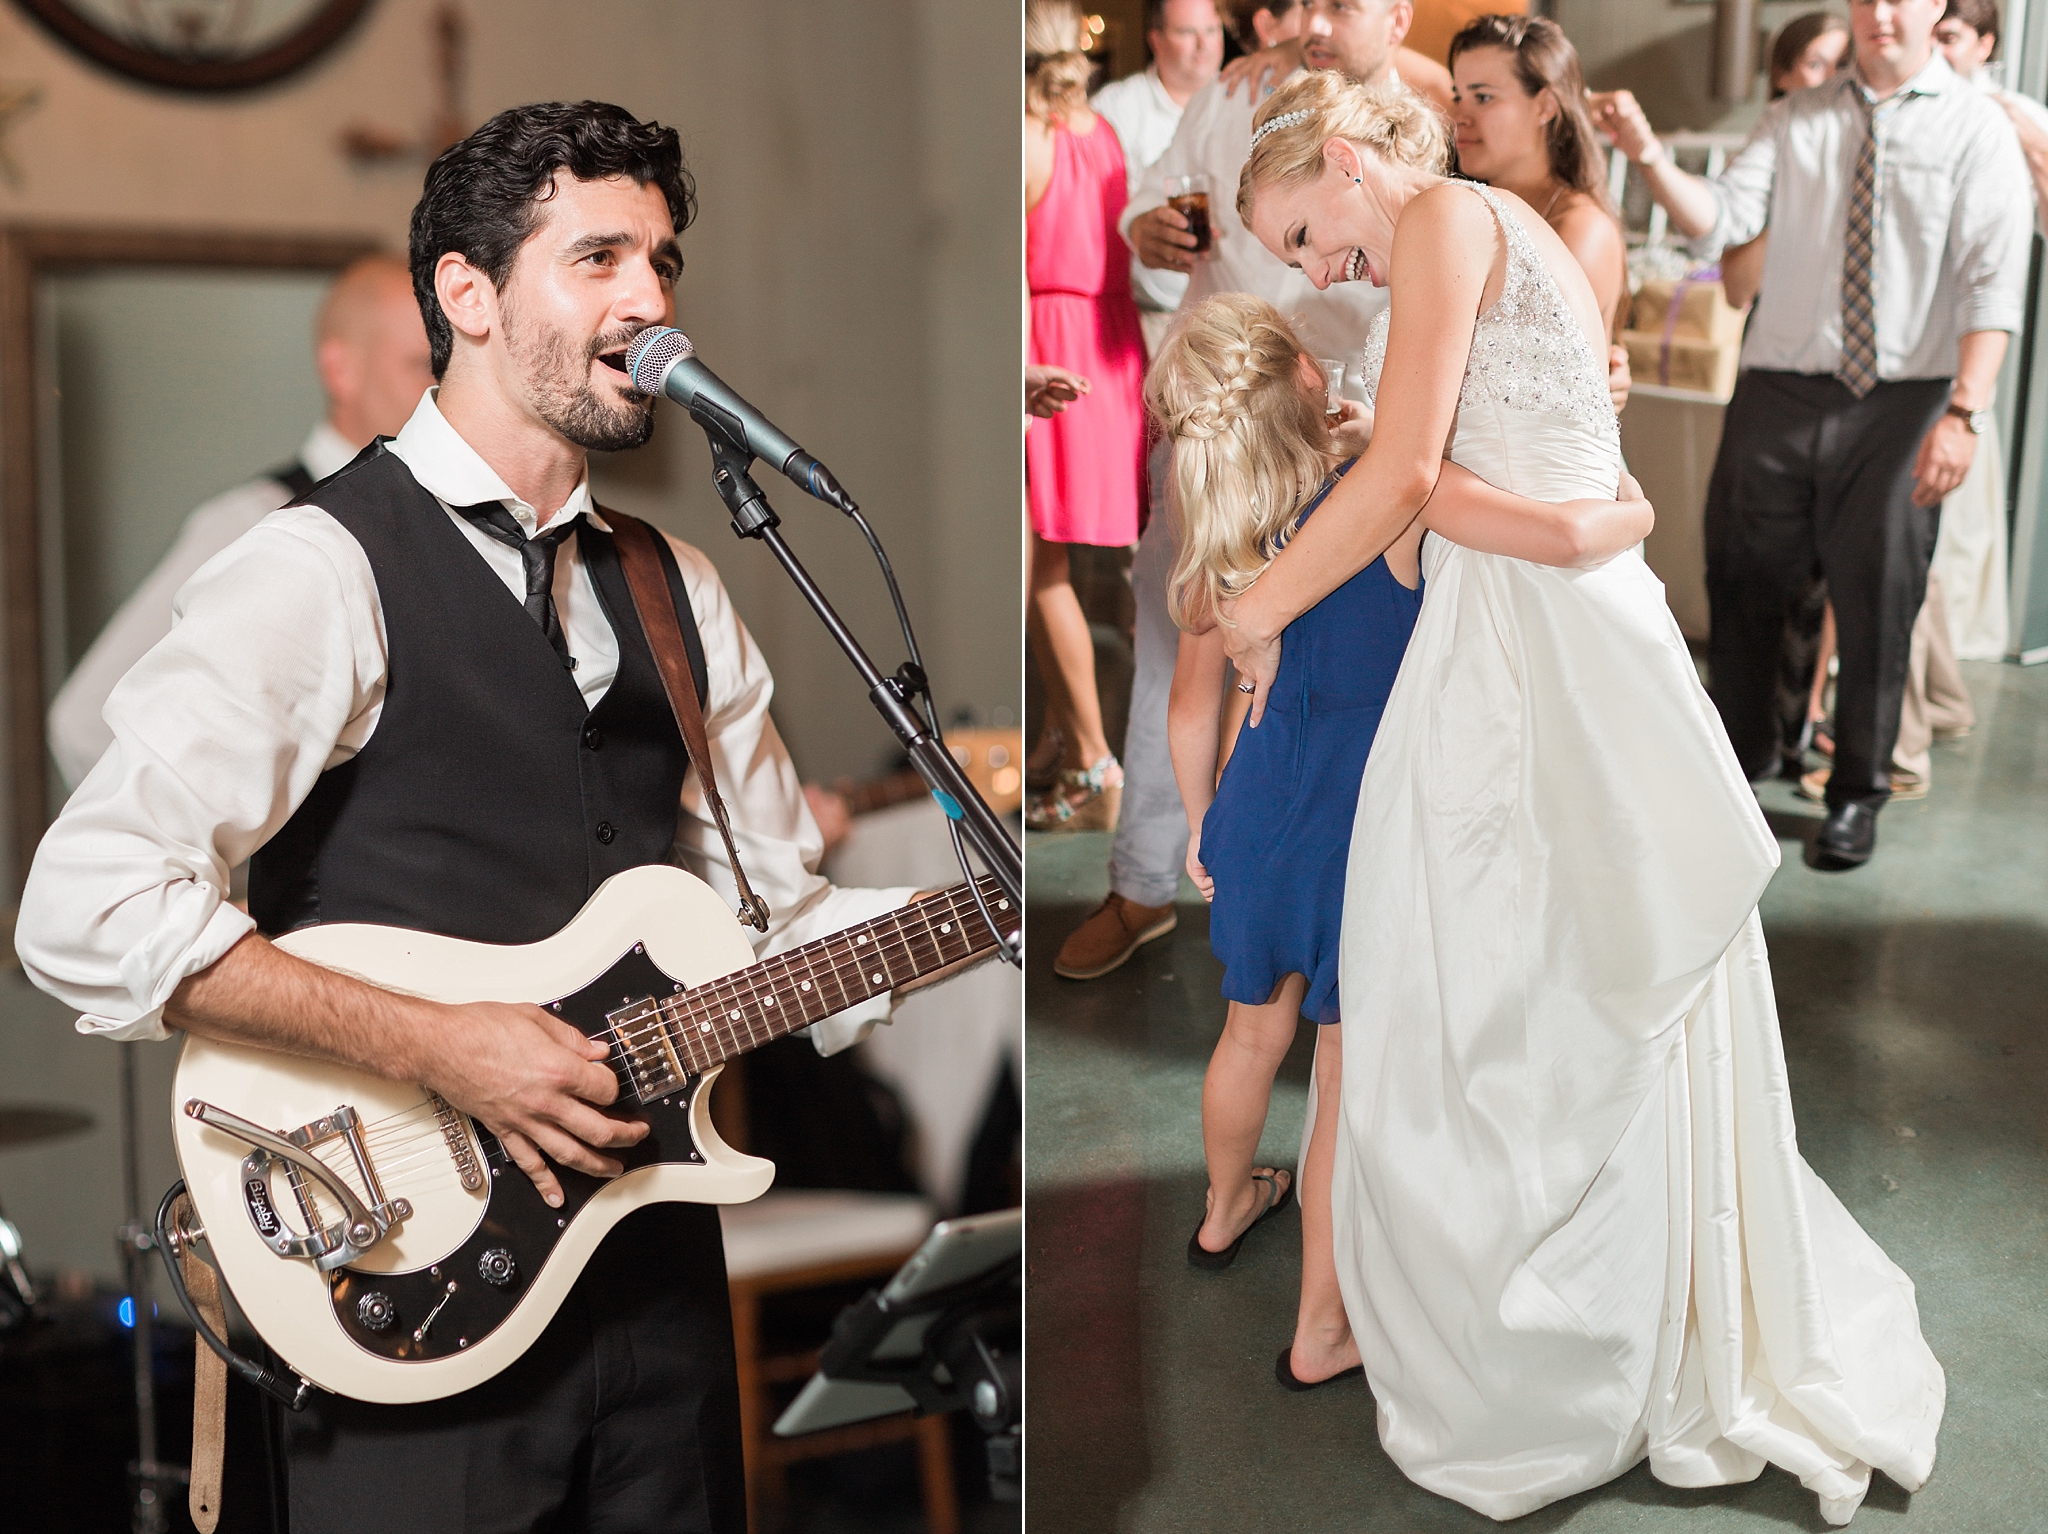 Is hiring a band a good investment or should you stick with a DJ? This DC wedding photographer discusses both sides of the argument! 